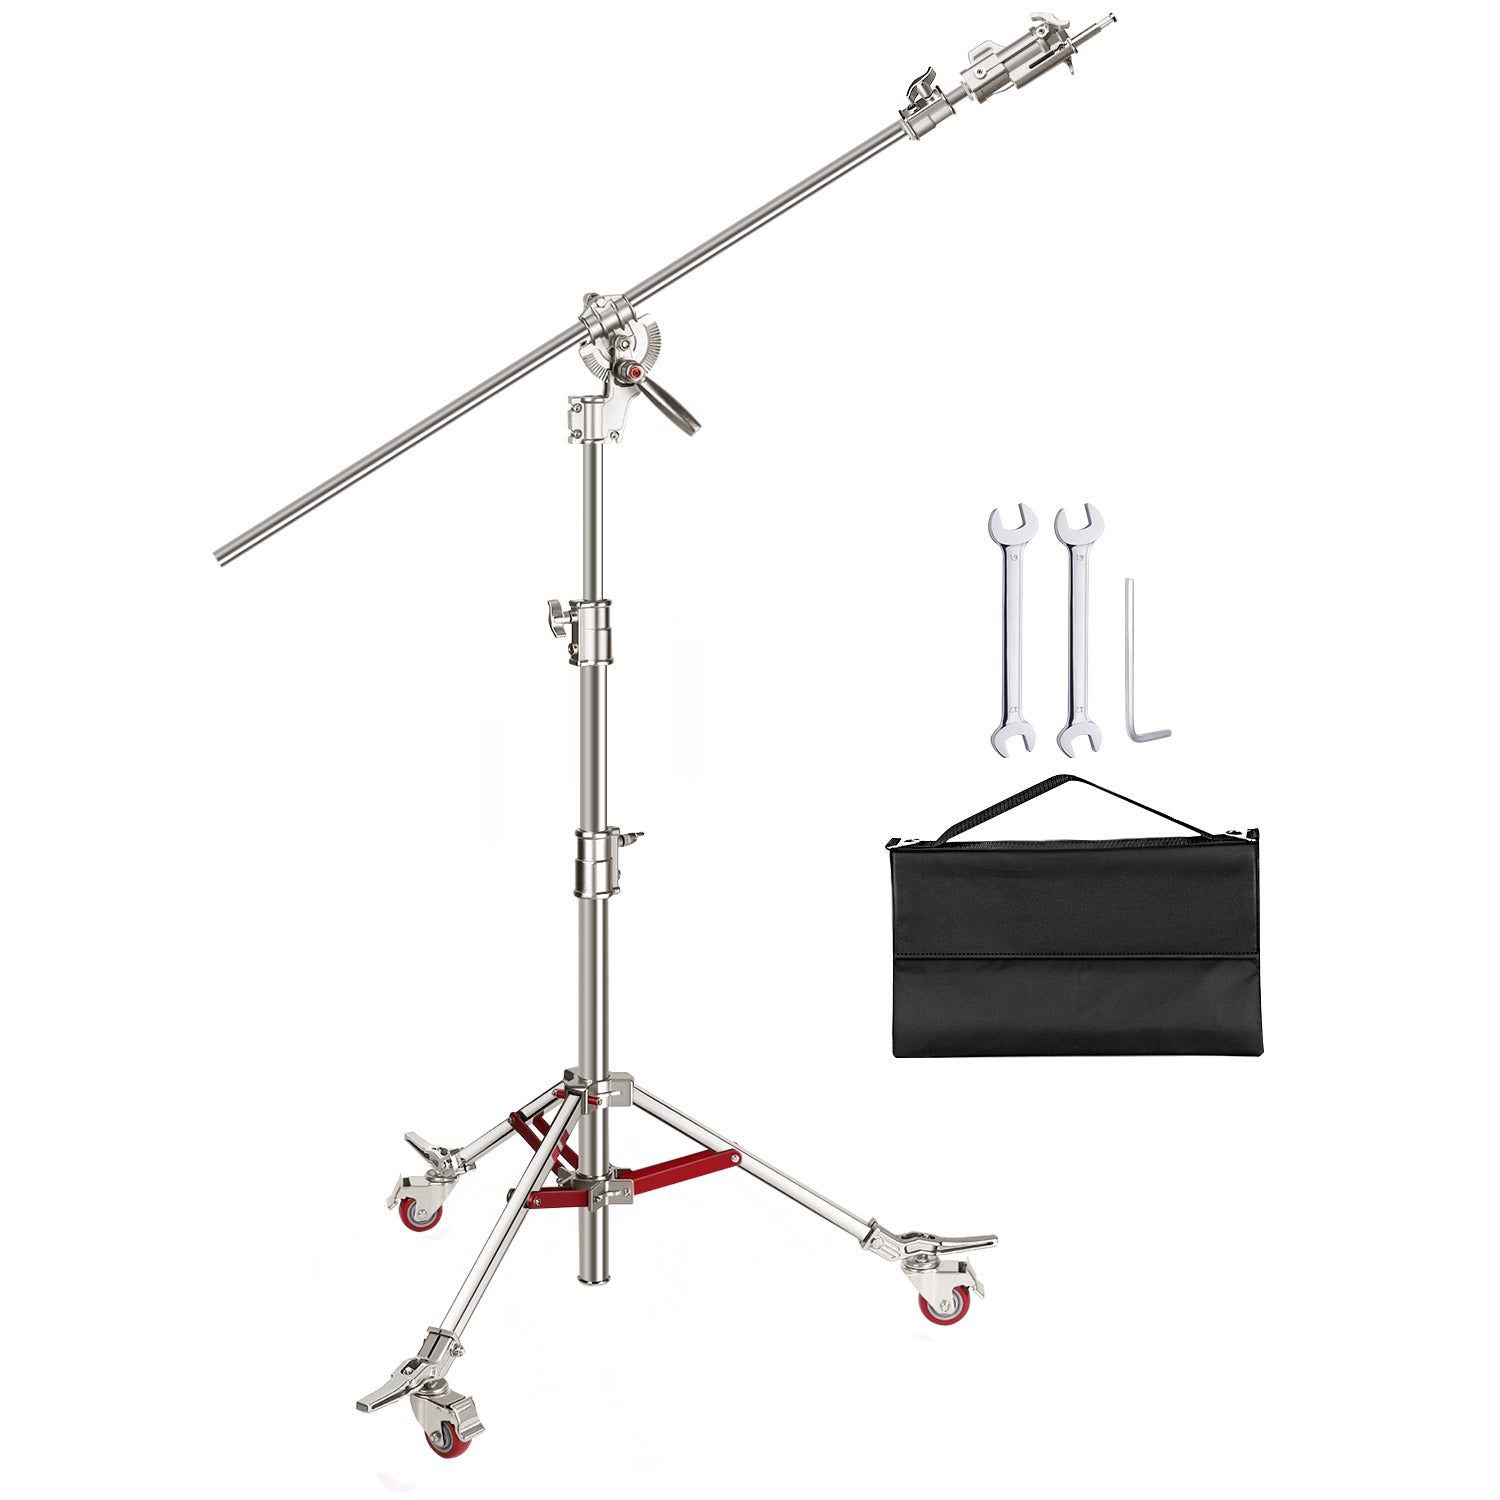 NEEWER 305cm Stainless Steel C Stand Light Stand with Casters